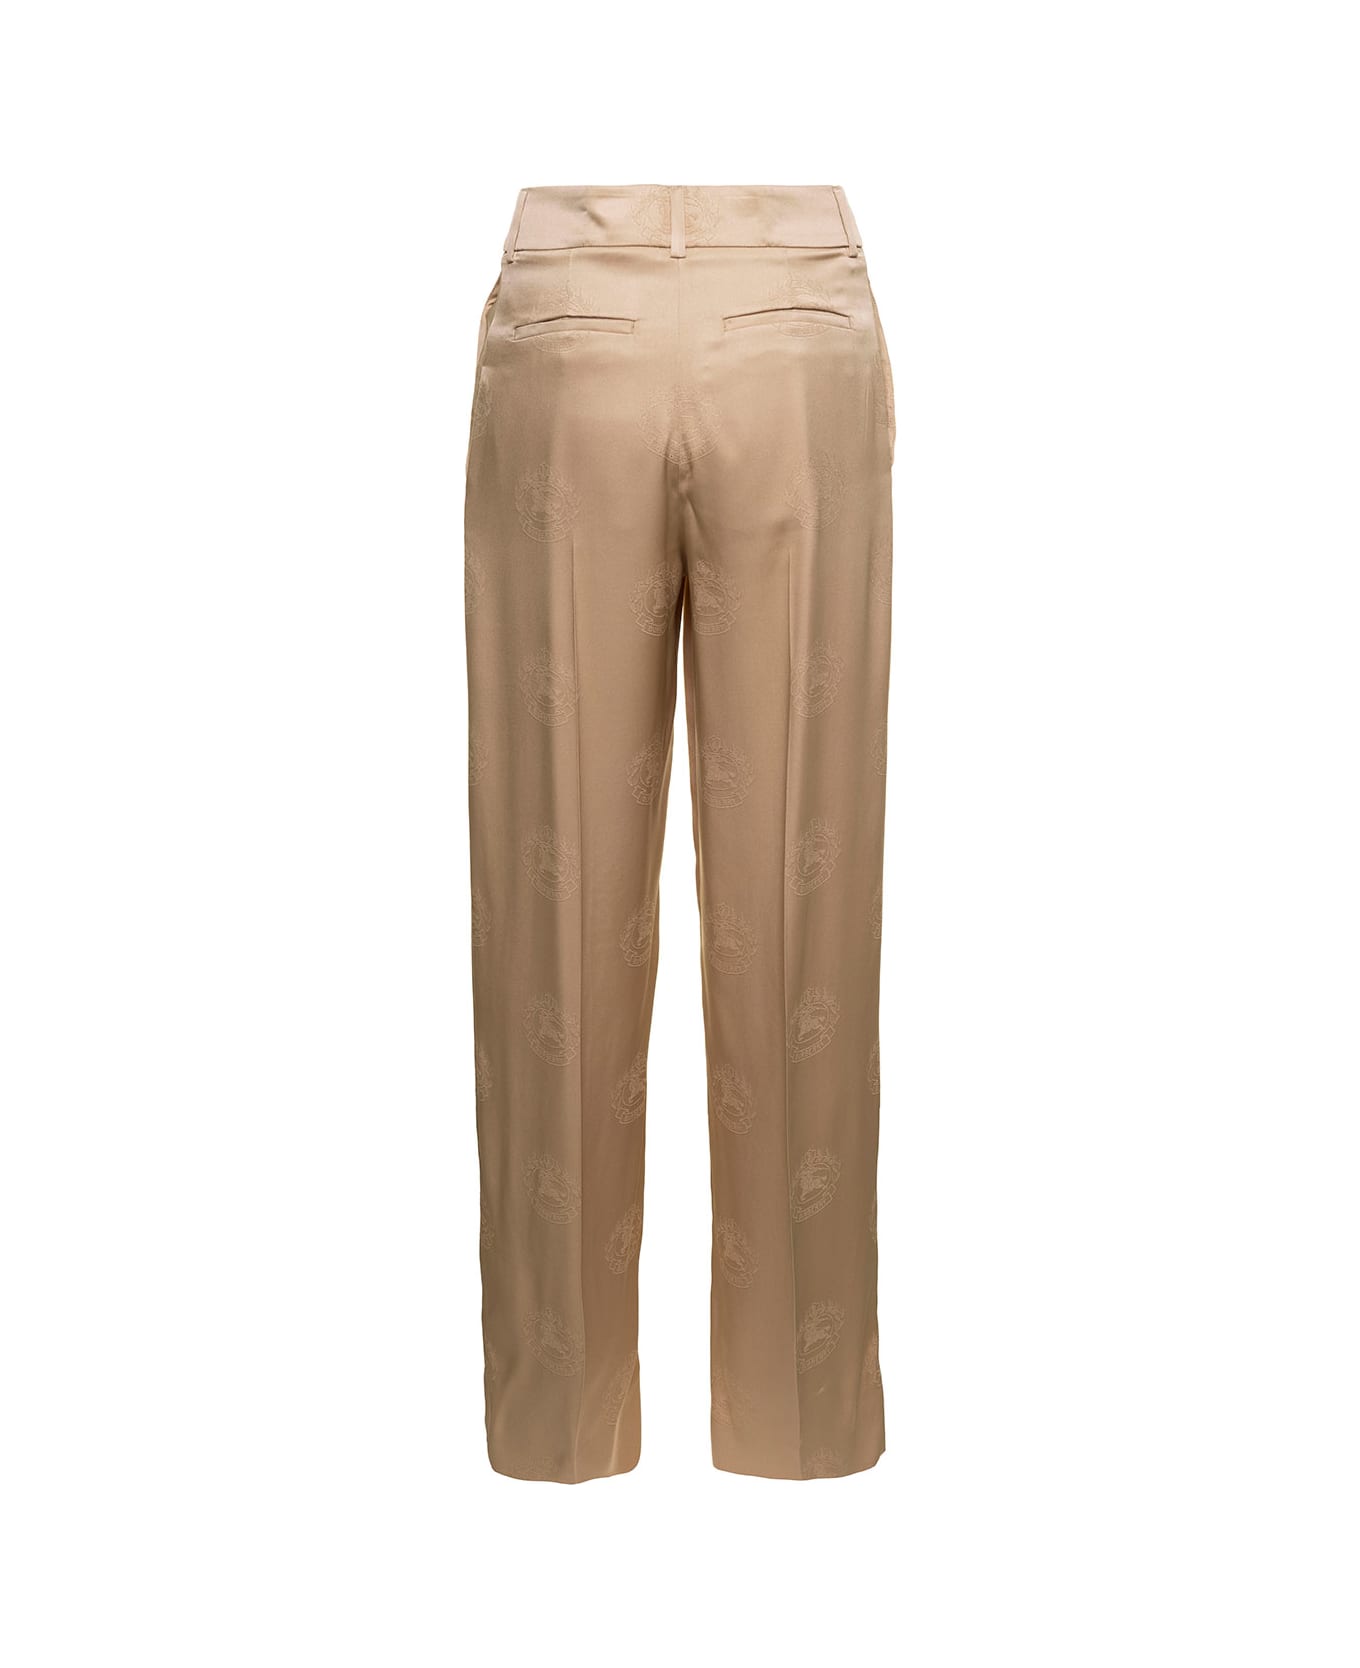 Burberry 'jane' Beige High-waisted Relaxed Pants In Silk Woman - Soft fawn